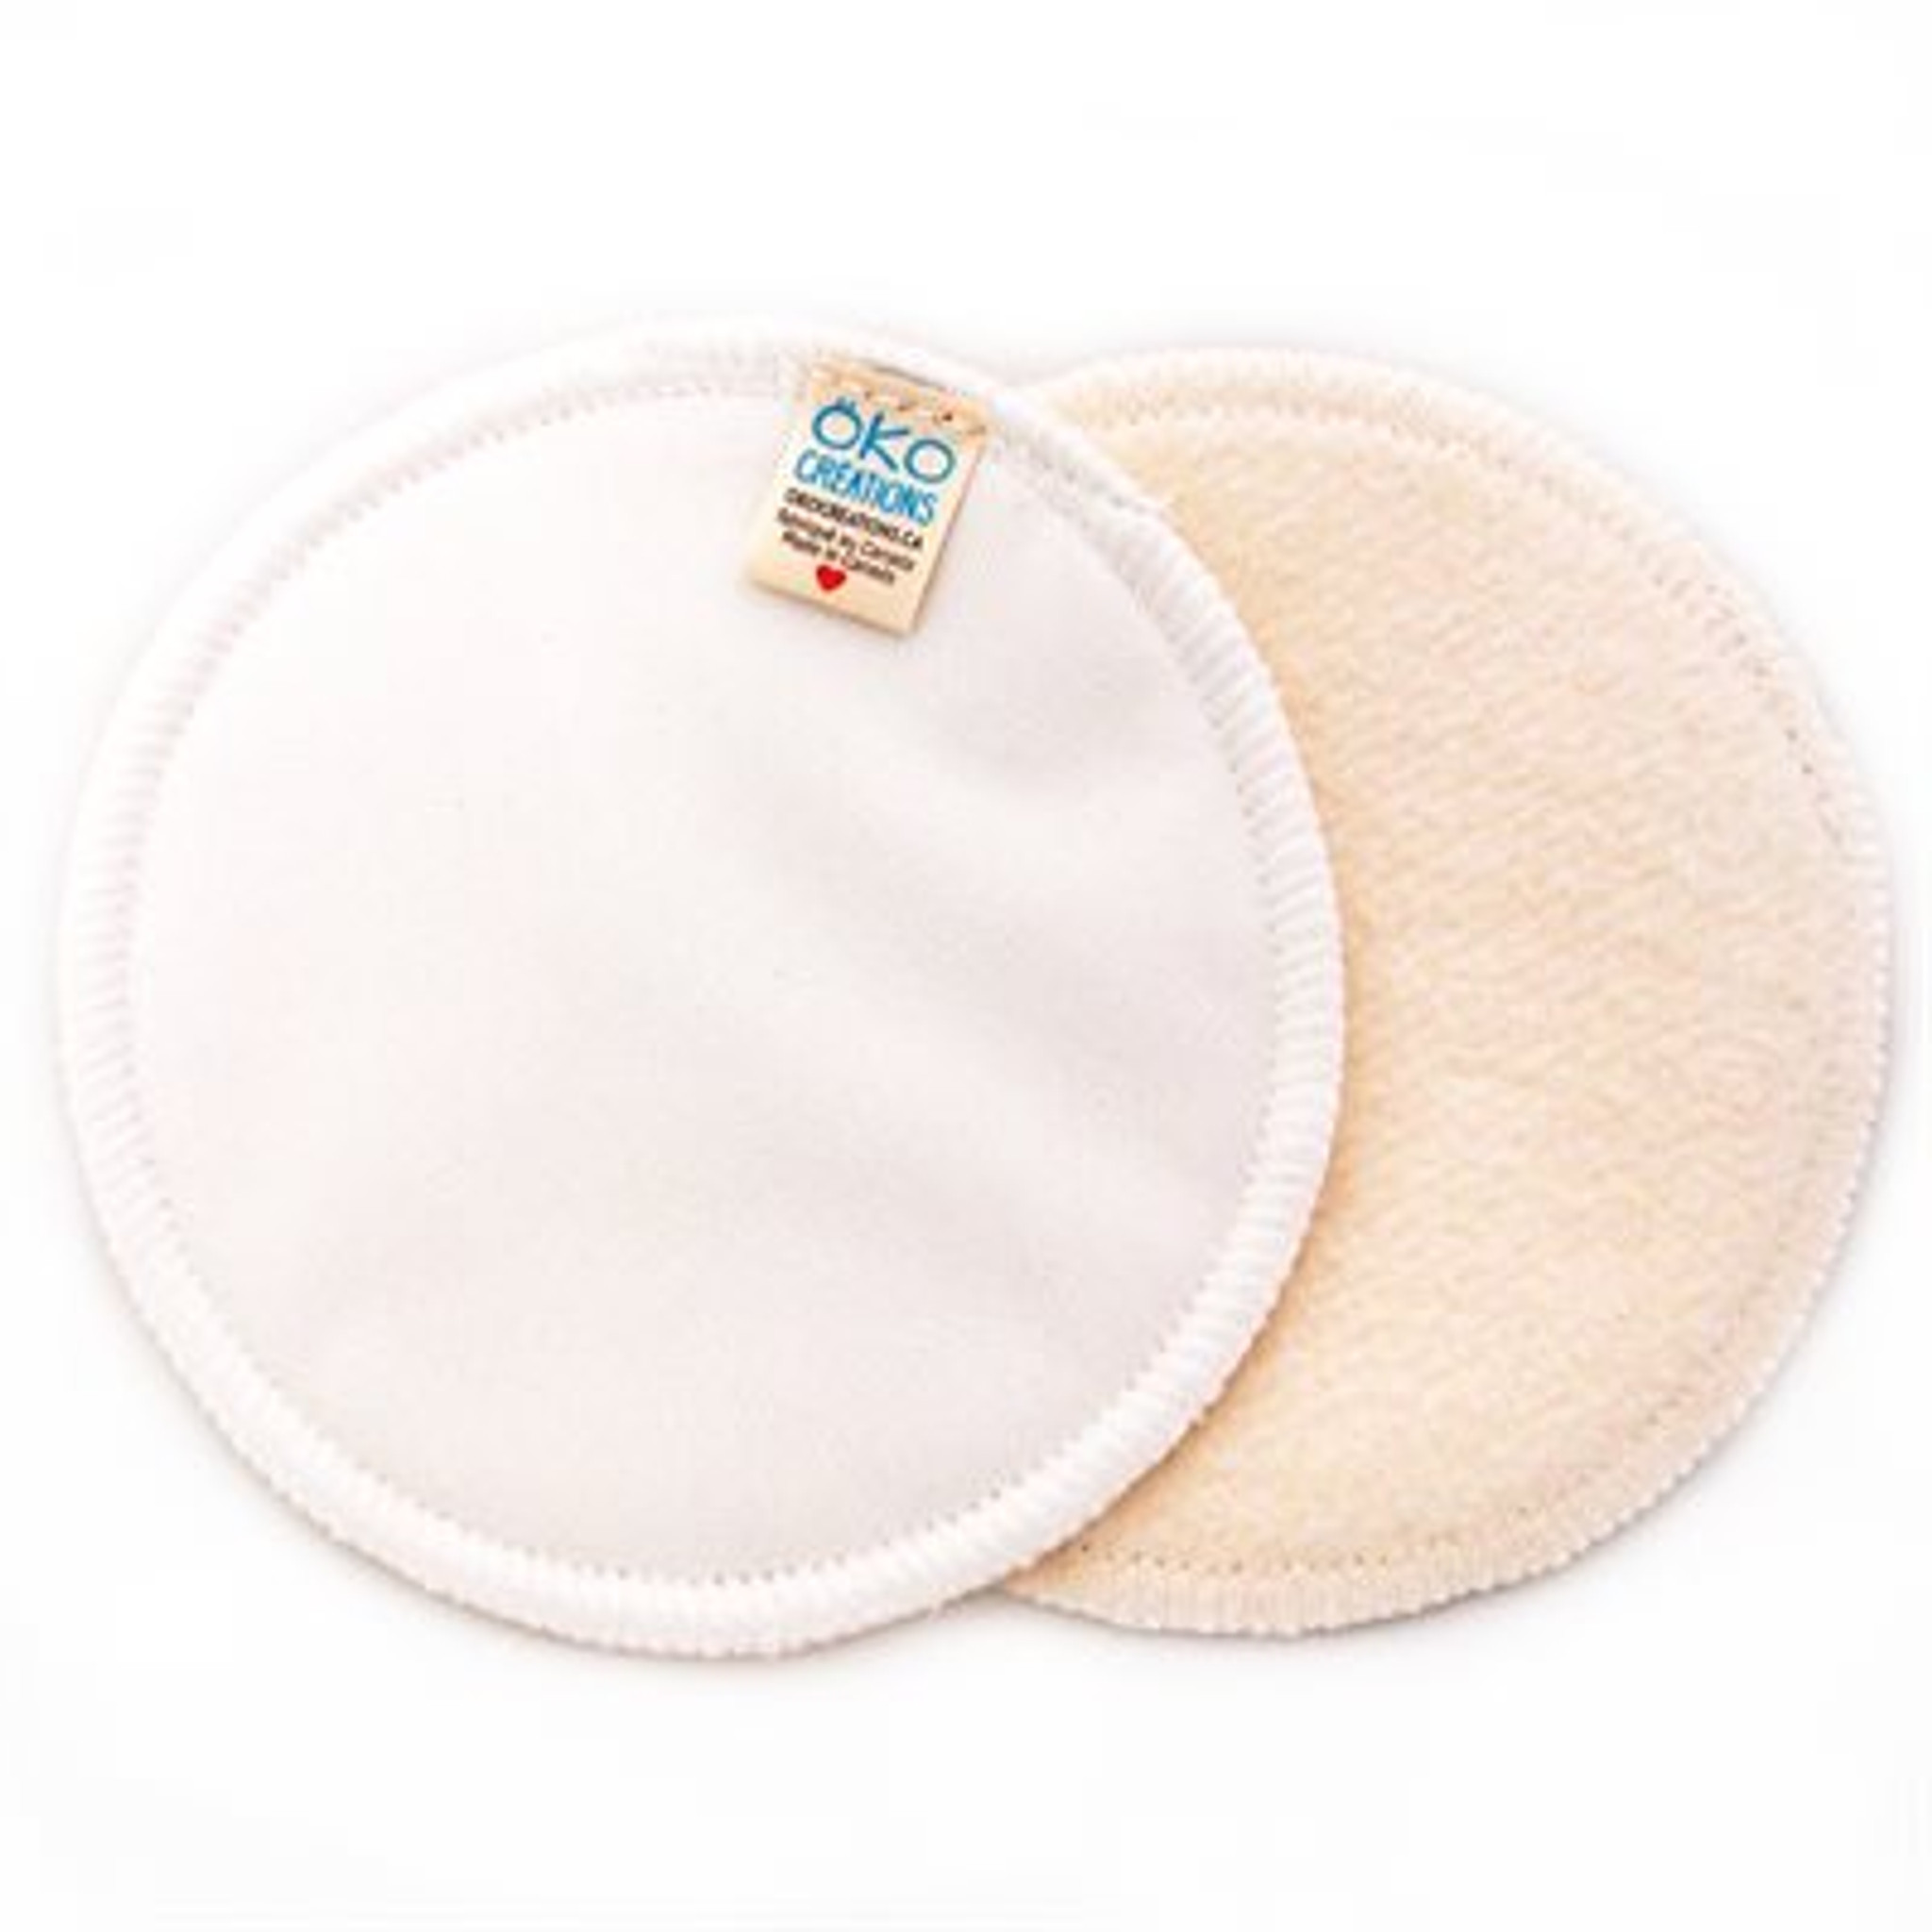 Oko Creations Hemp Organic Cotton Breast Pads With Waterproof Layer - Reusable  Breast Pads - Ava's Appletree